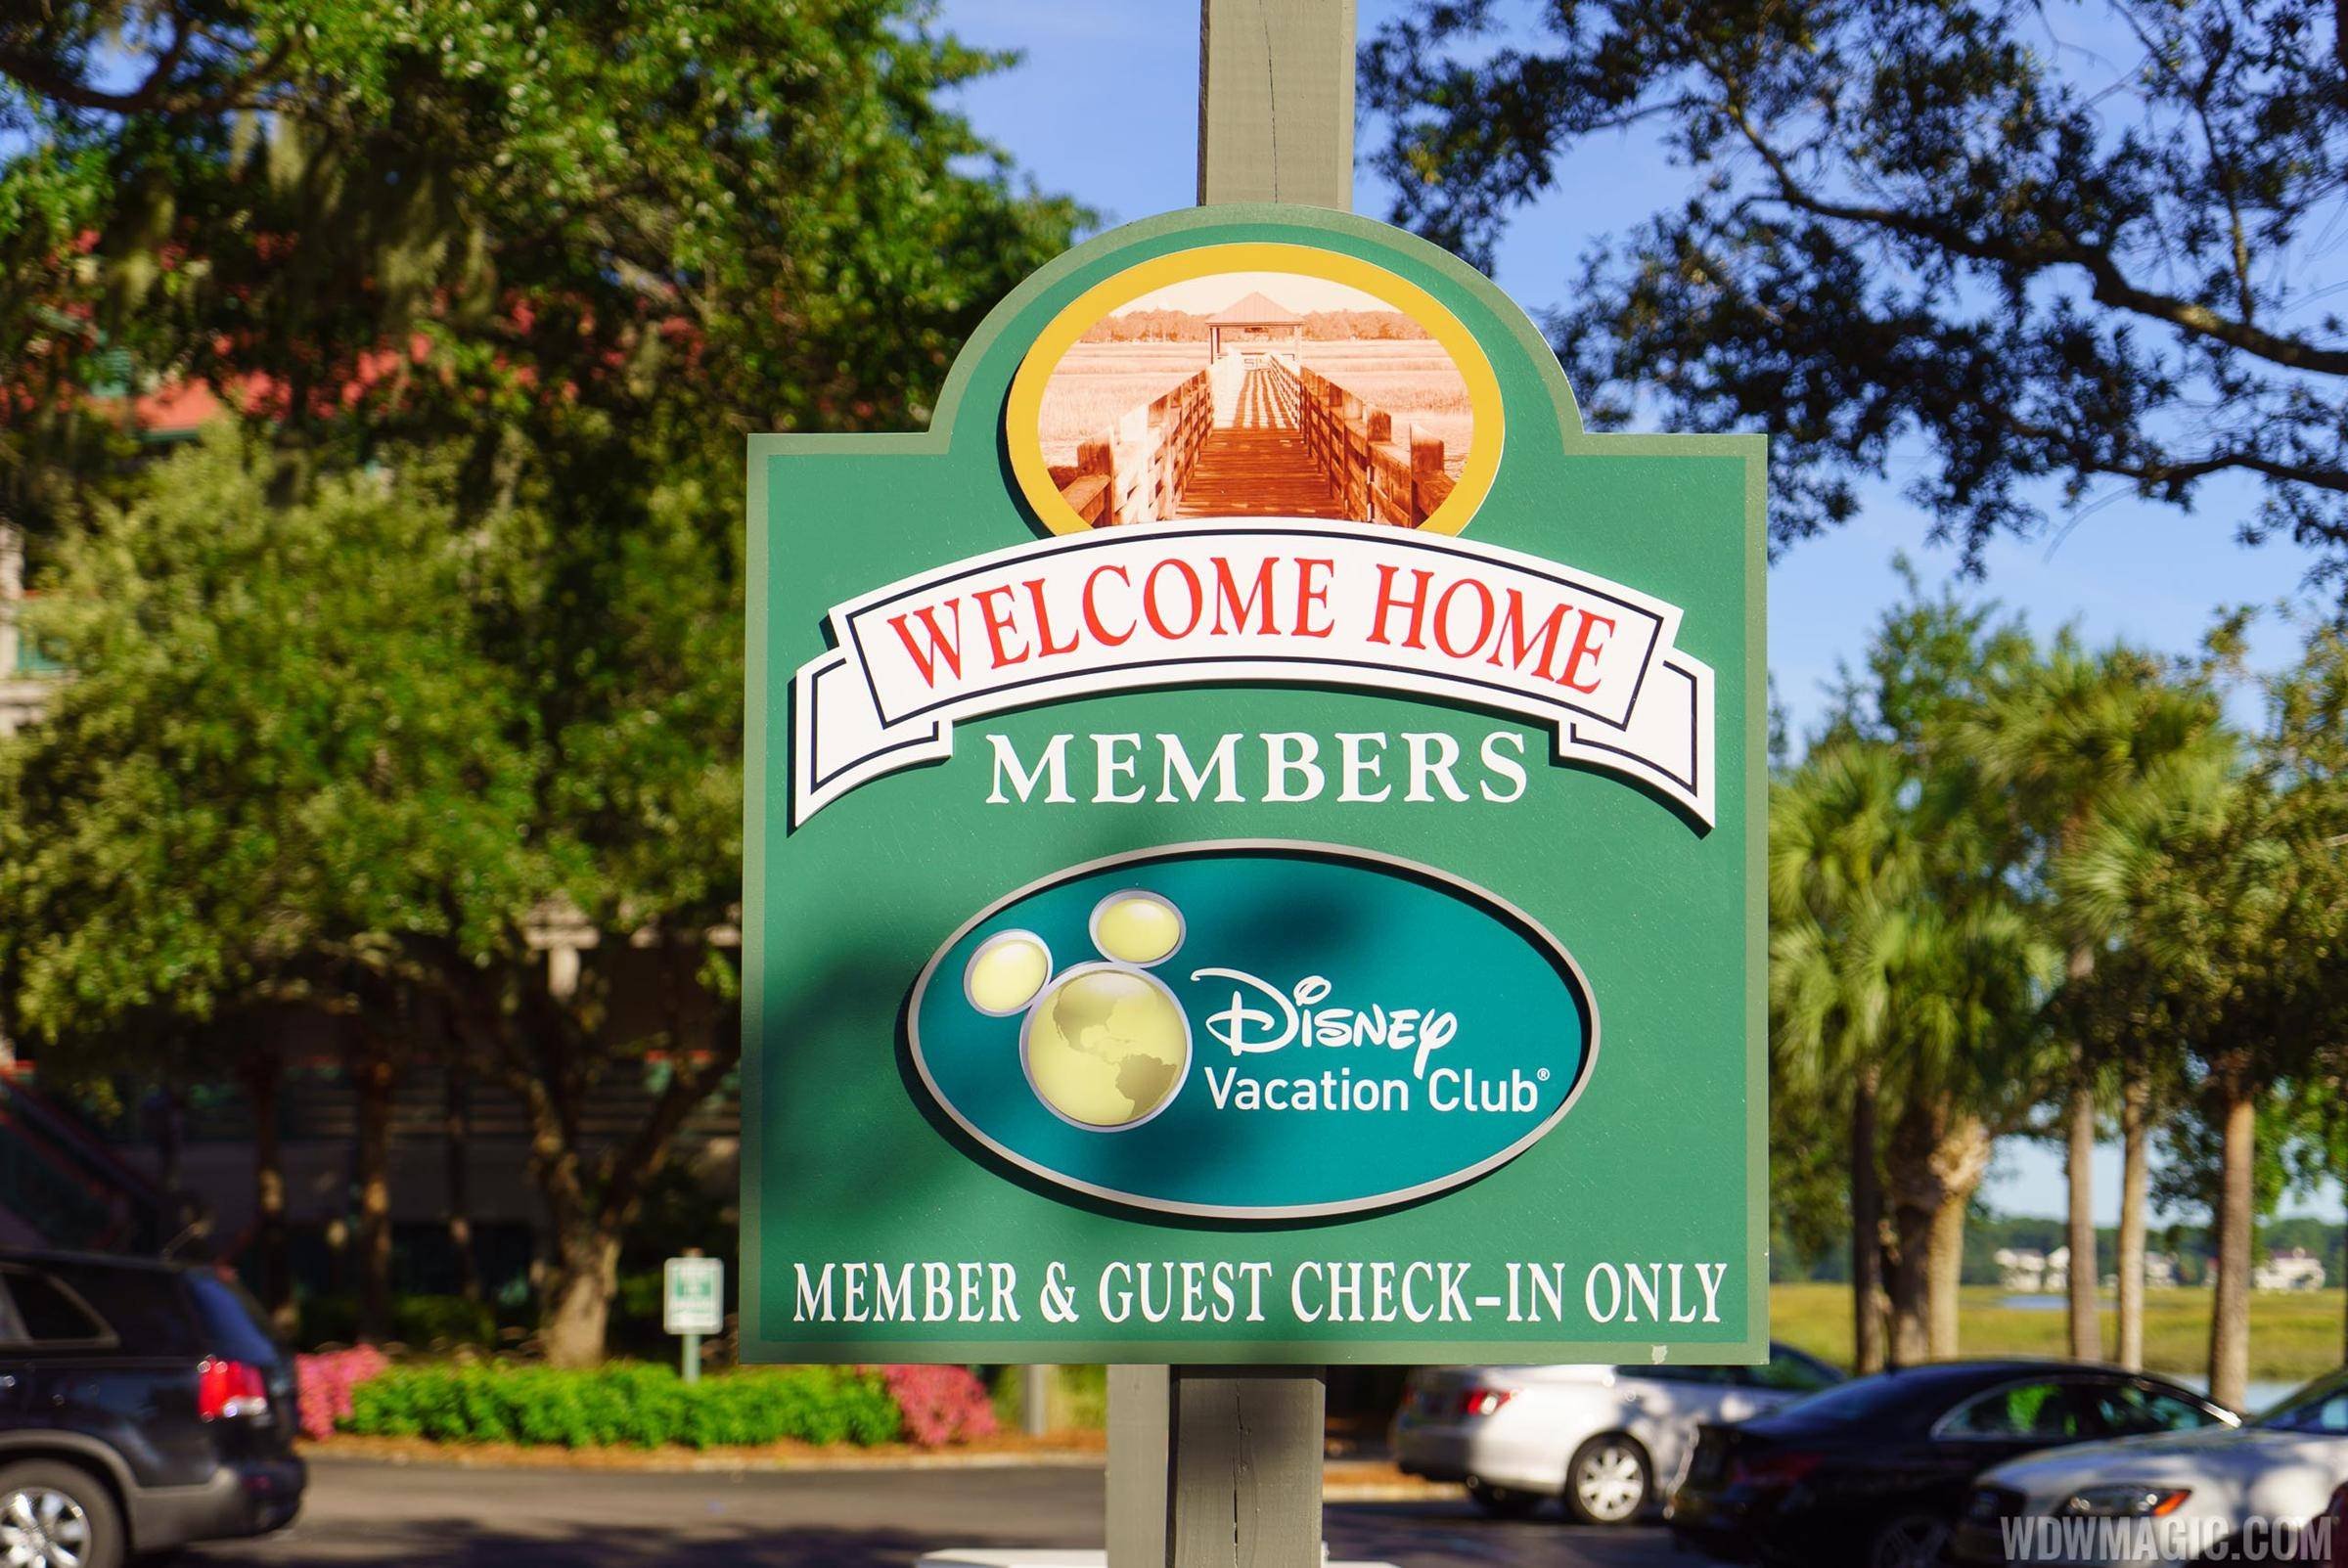 Disney Vacation Club overview